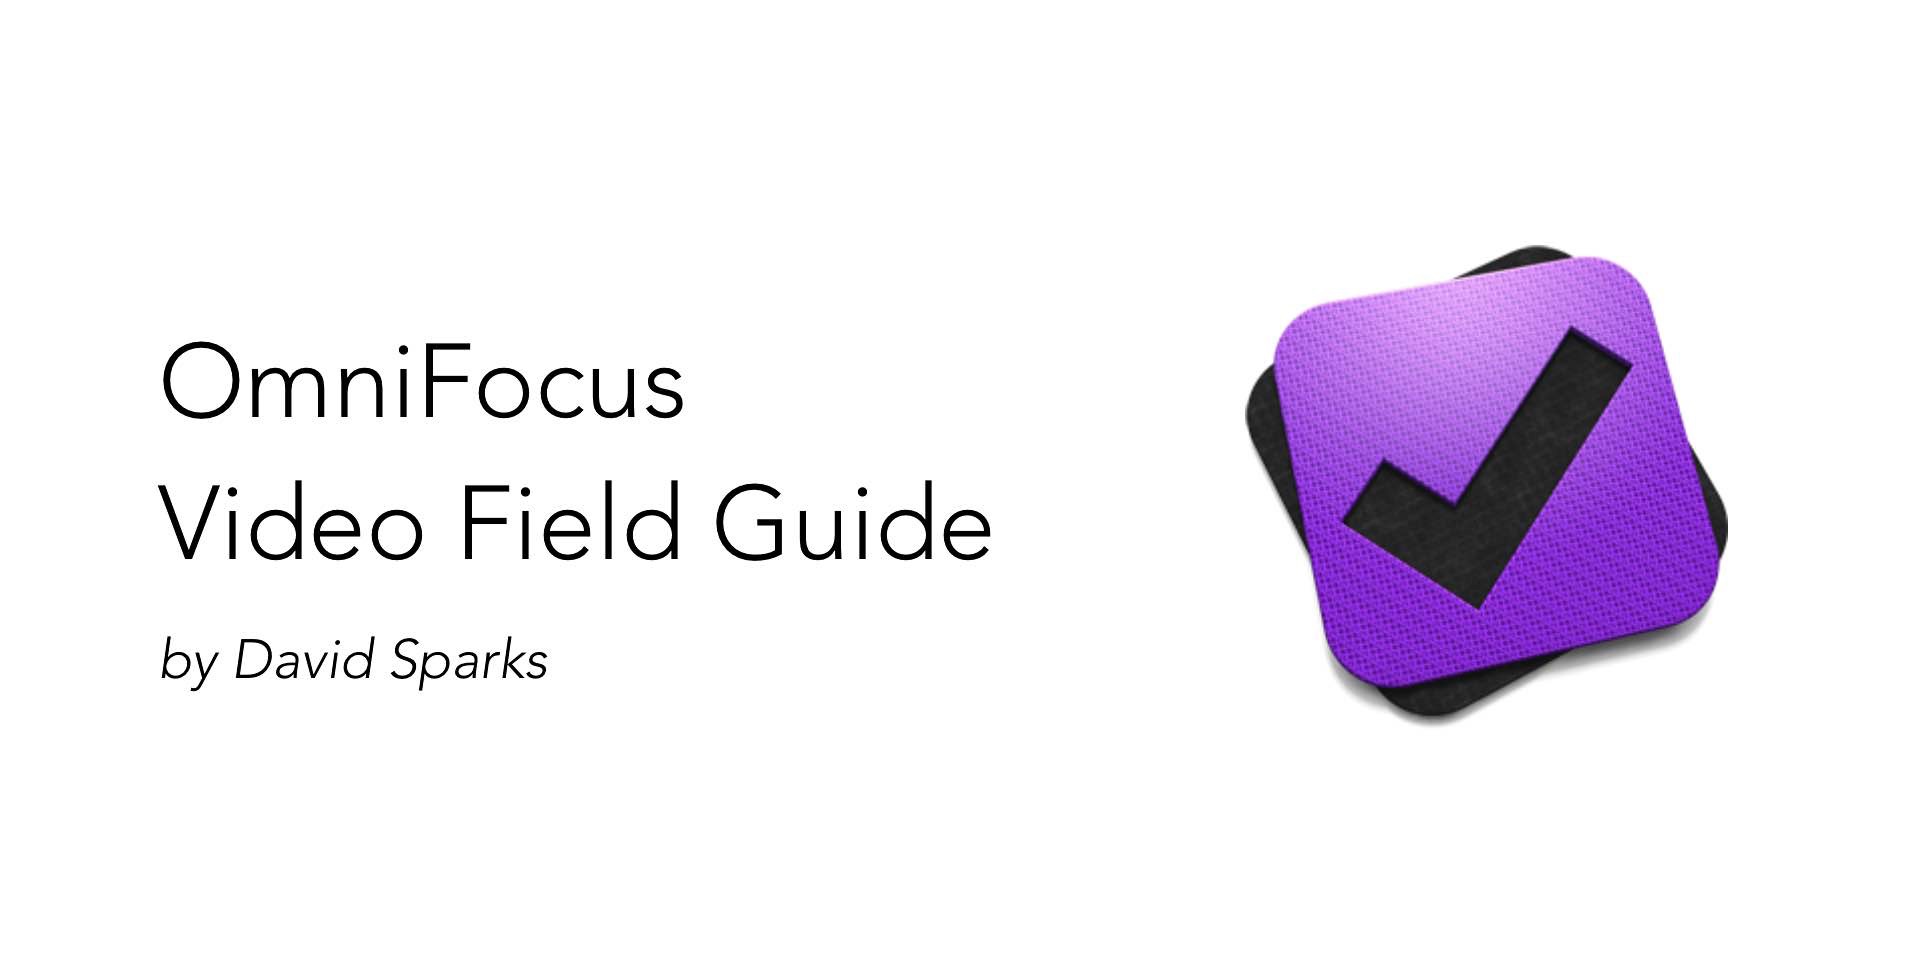 omnifocus-video-field-guide-by-david-sparks